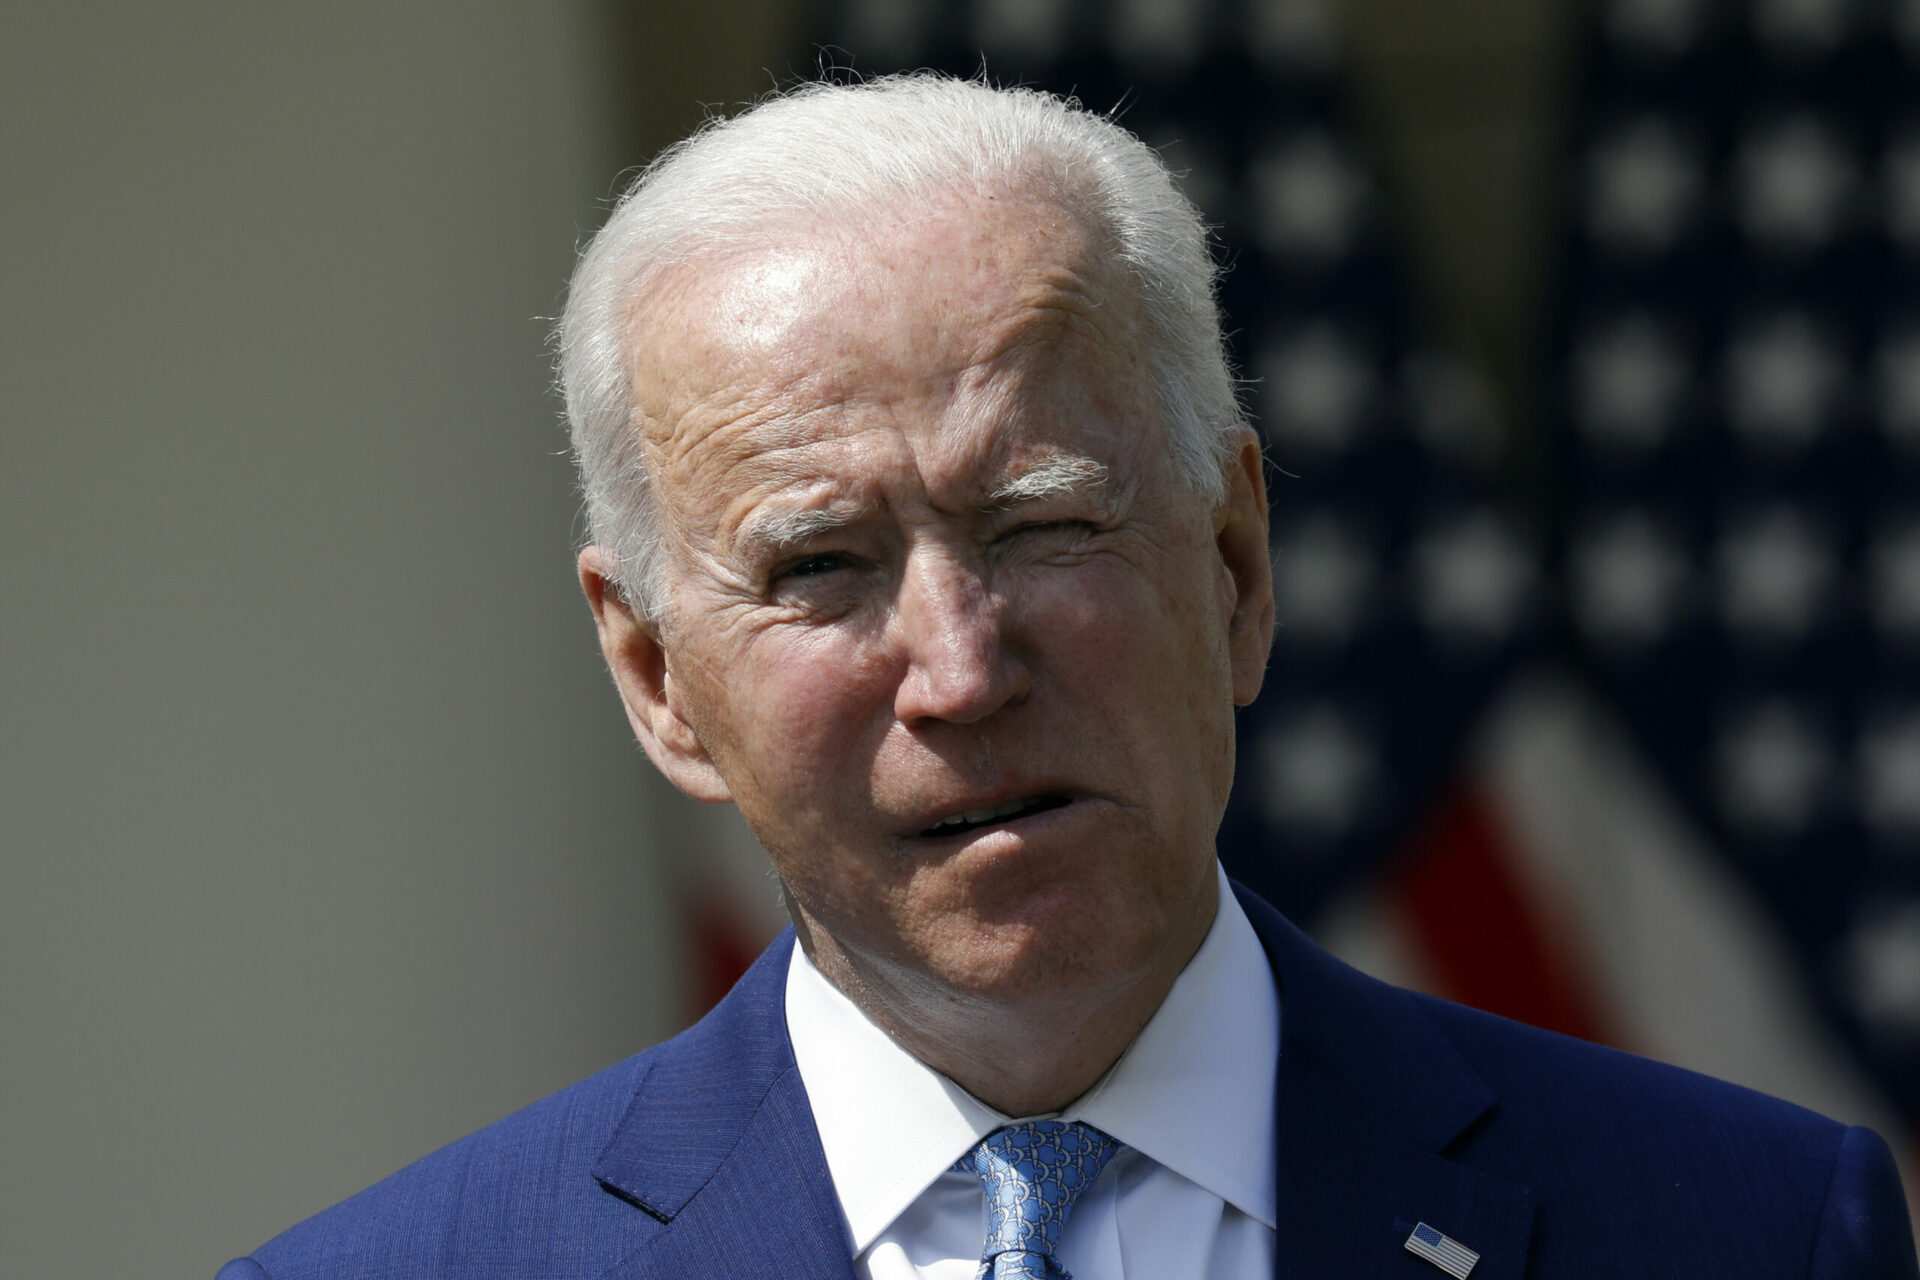 Biden had cancerous lesion removed from chest last month, his doctor says